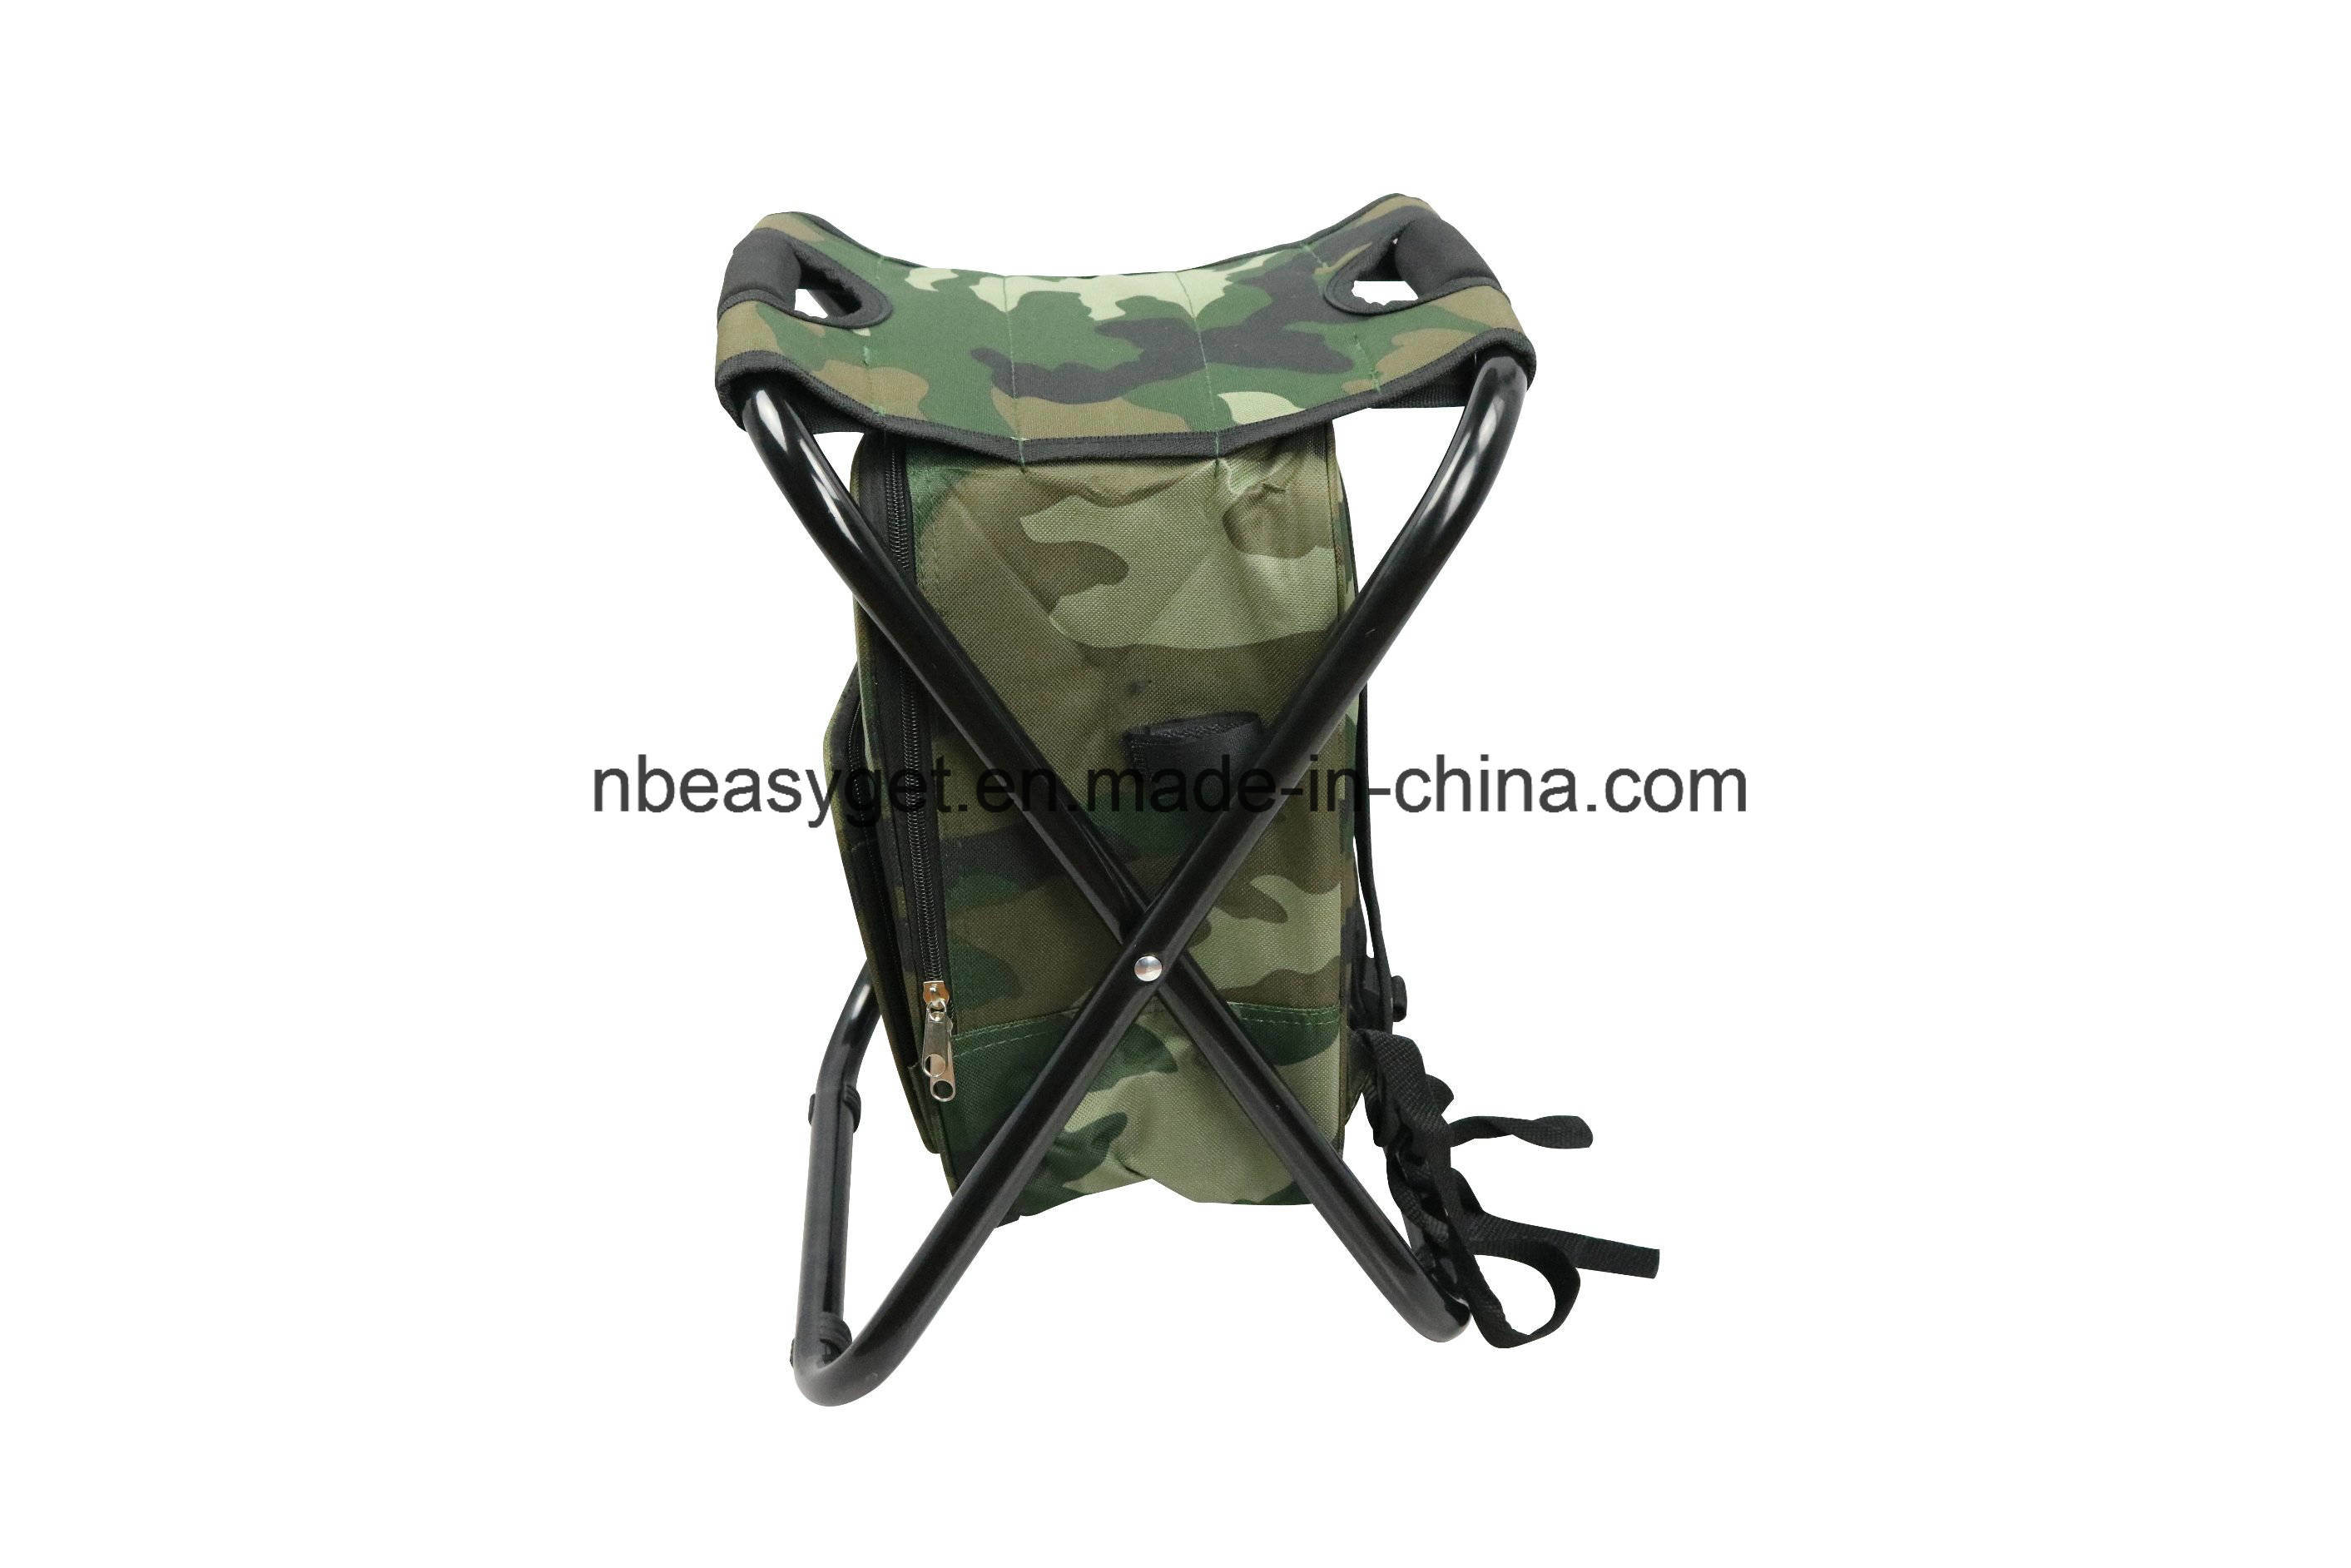 Folding Chair Foldable Camouflage Backpack Cooler Bag 3 in 1 Portable Fishing Stool and Sports Chair